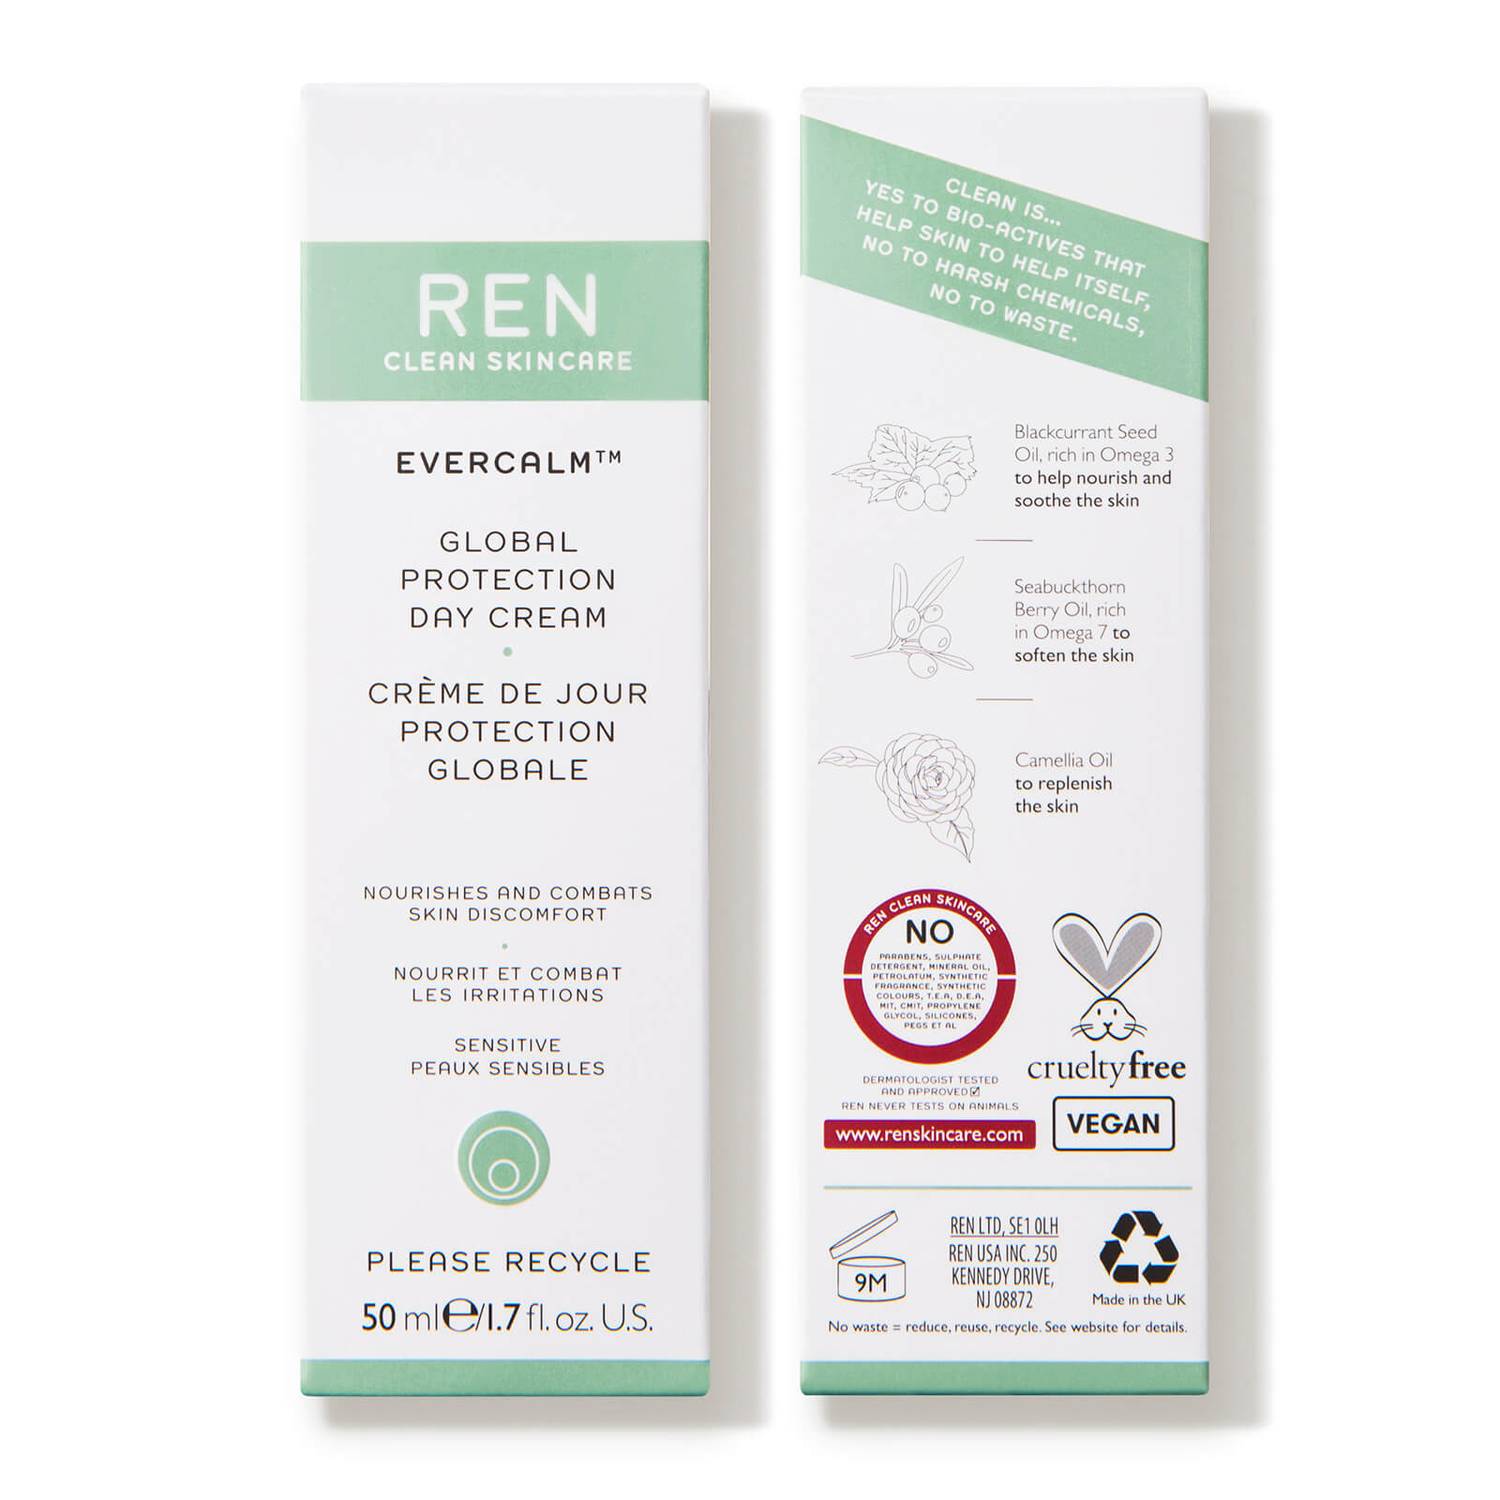 Evercalm Global Protection day cream by REN Skincare contains Hydrating Sea Buckthorn Oil, Camellia and Calendula Oils, and an exclusive Global Protection Complex are combined to create a comforting formula suitable for dry, sensitive, or eczema-prone skin, giving your complexion strength to last into the future.